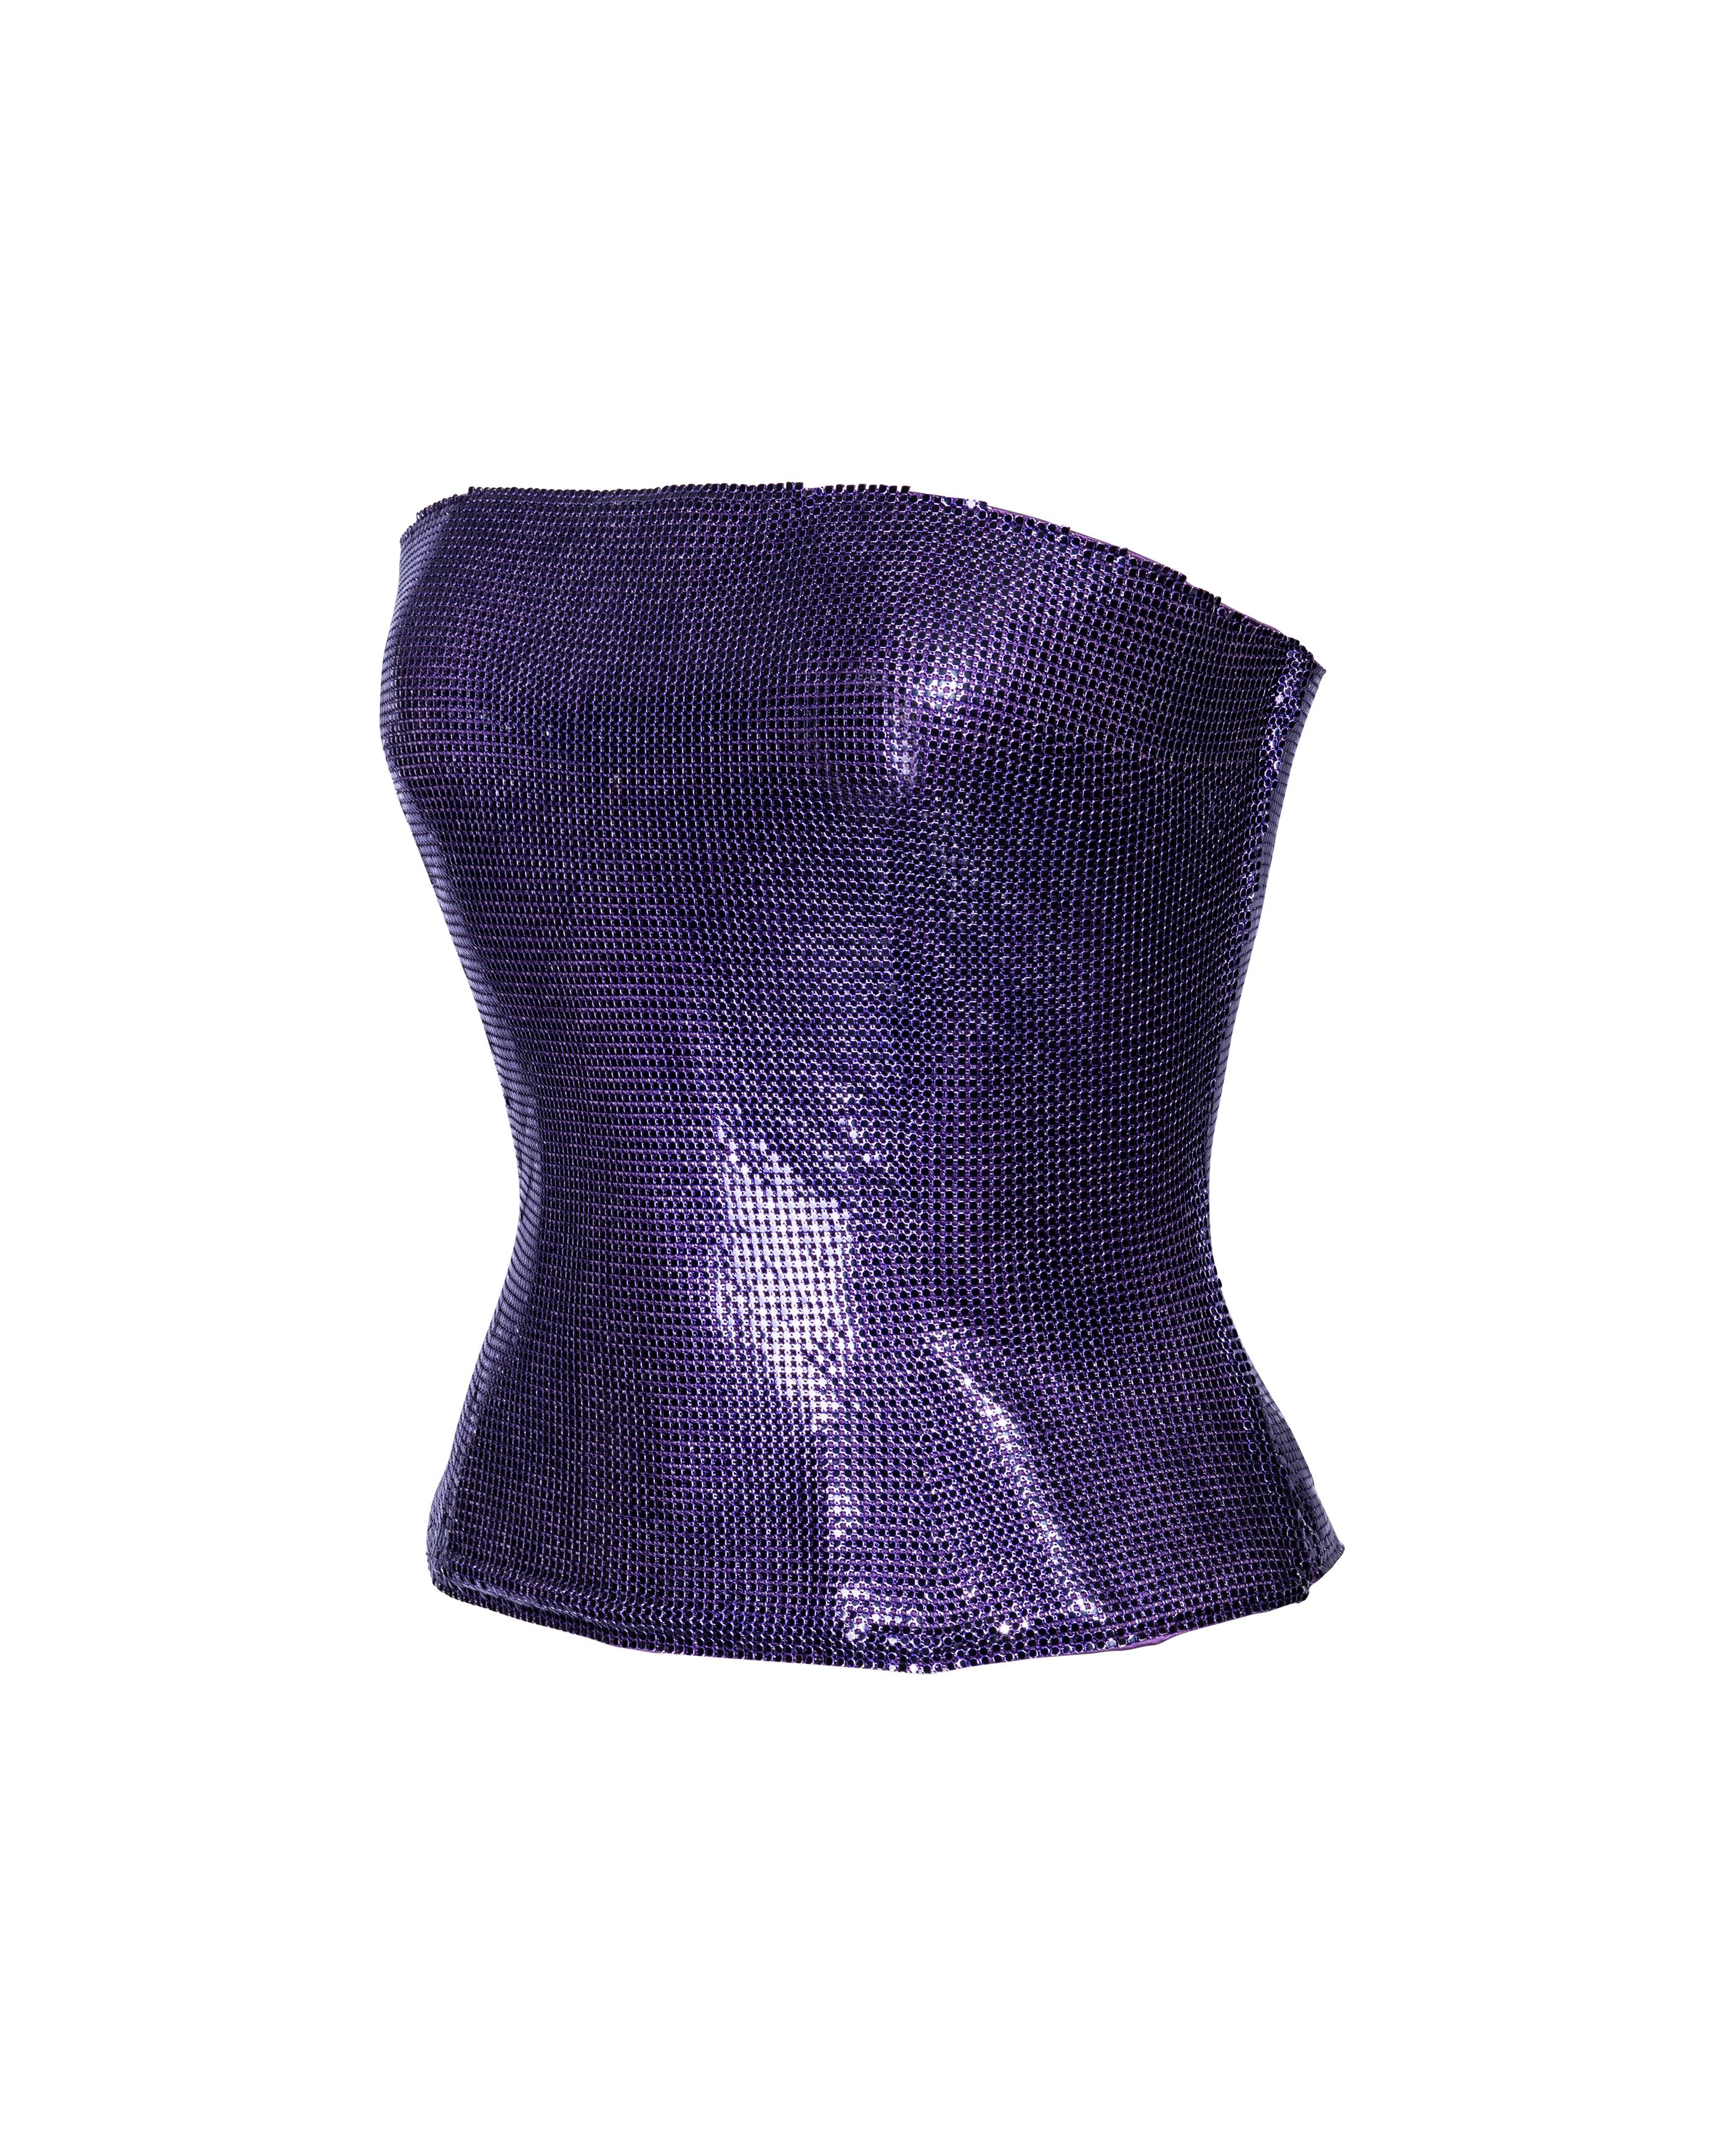 S/S 1998 Atelier Versace Haute Couture Purple Strapless Oroton Chainmail Top In Excellent Condition For Sale In North Hollywood, CA